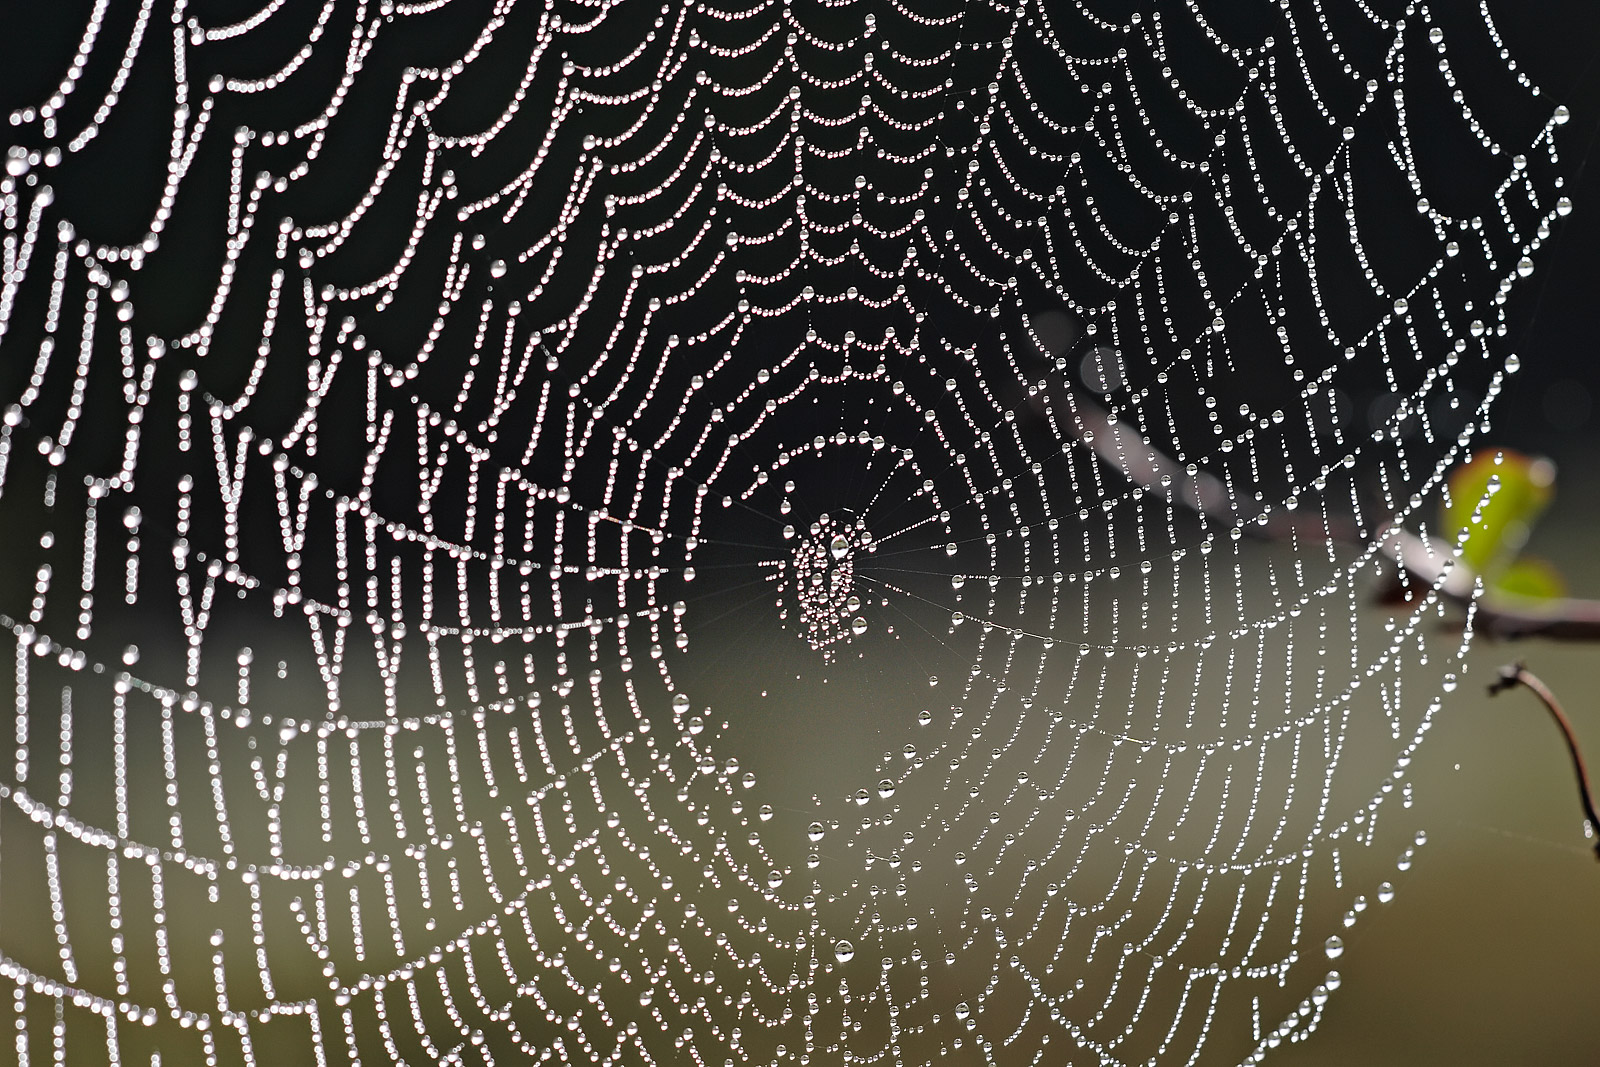 [Spider_web_with_dew_drops04.jpg]